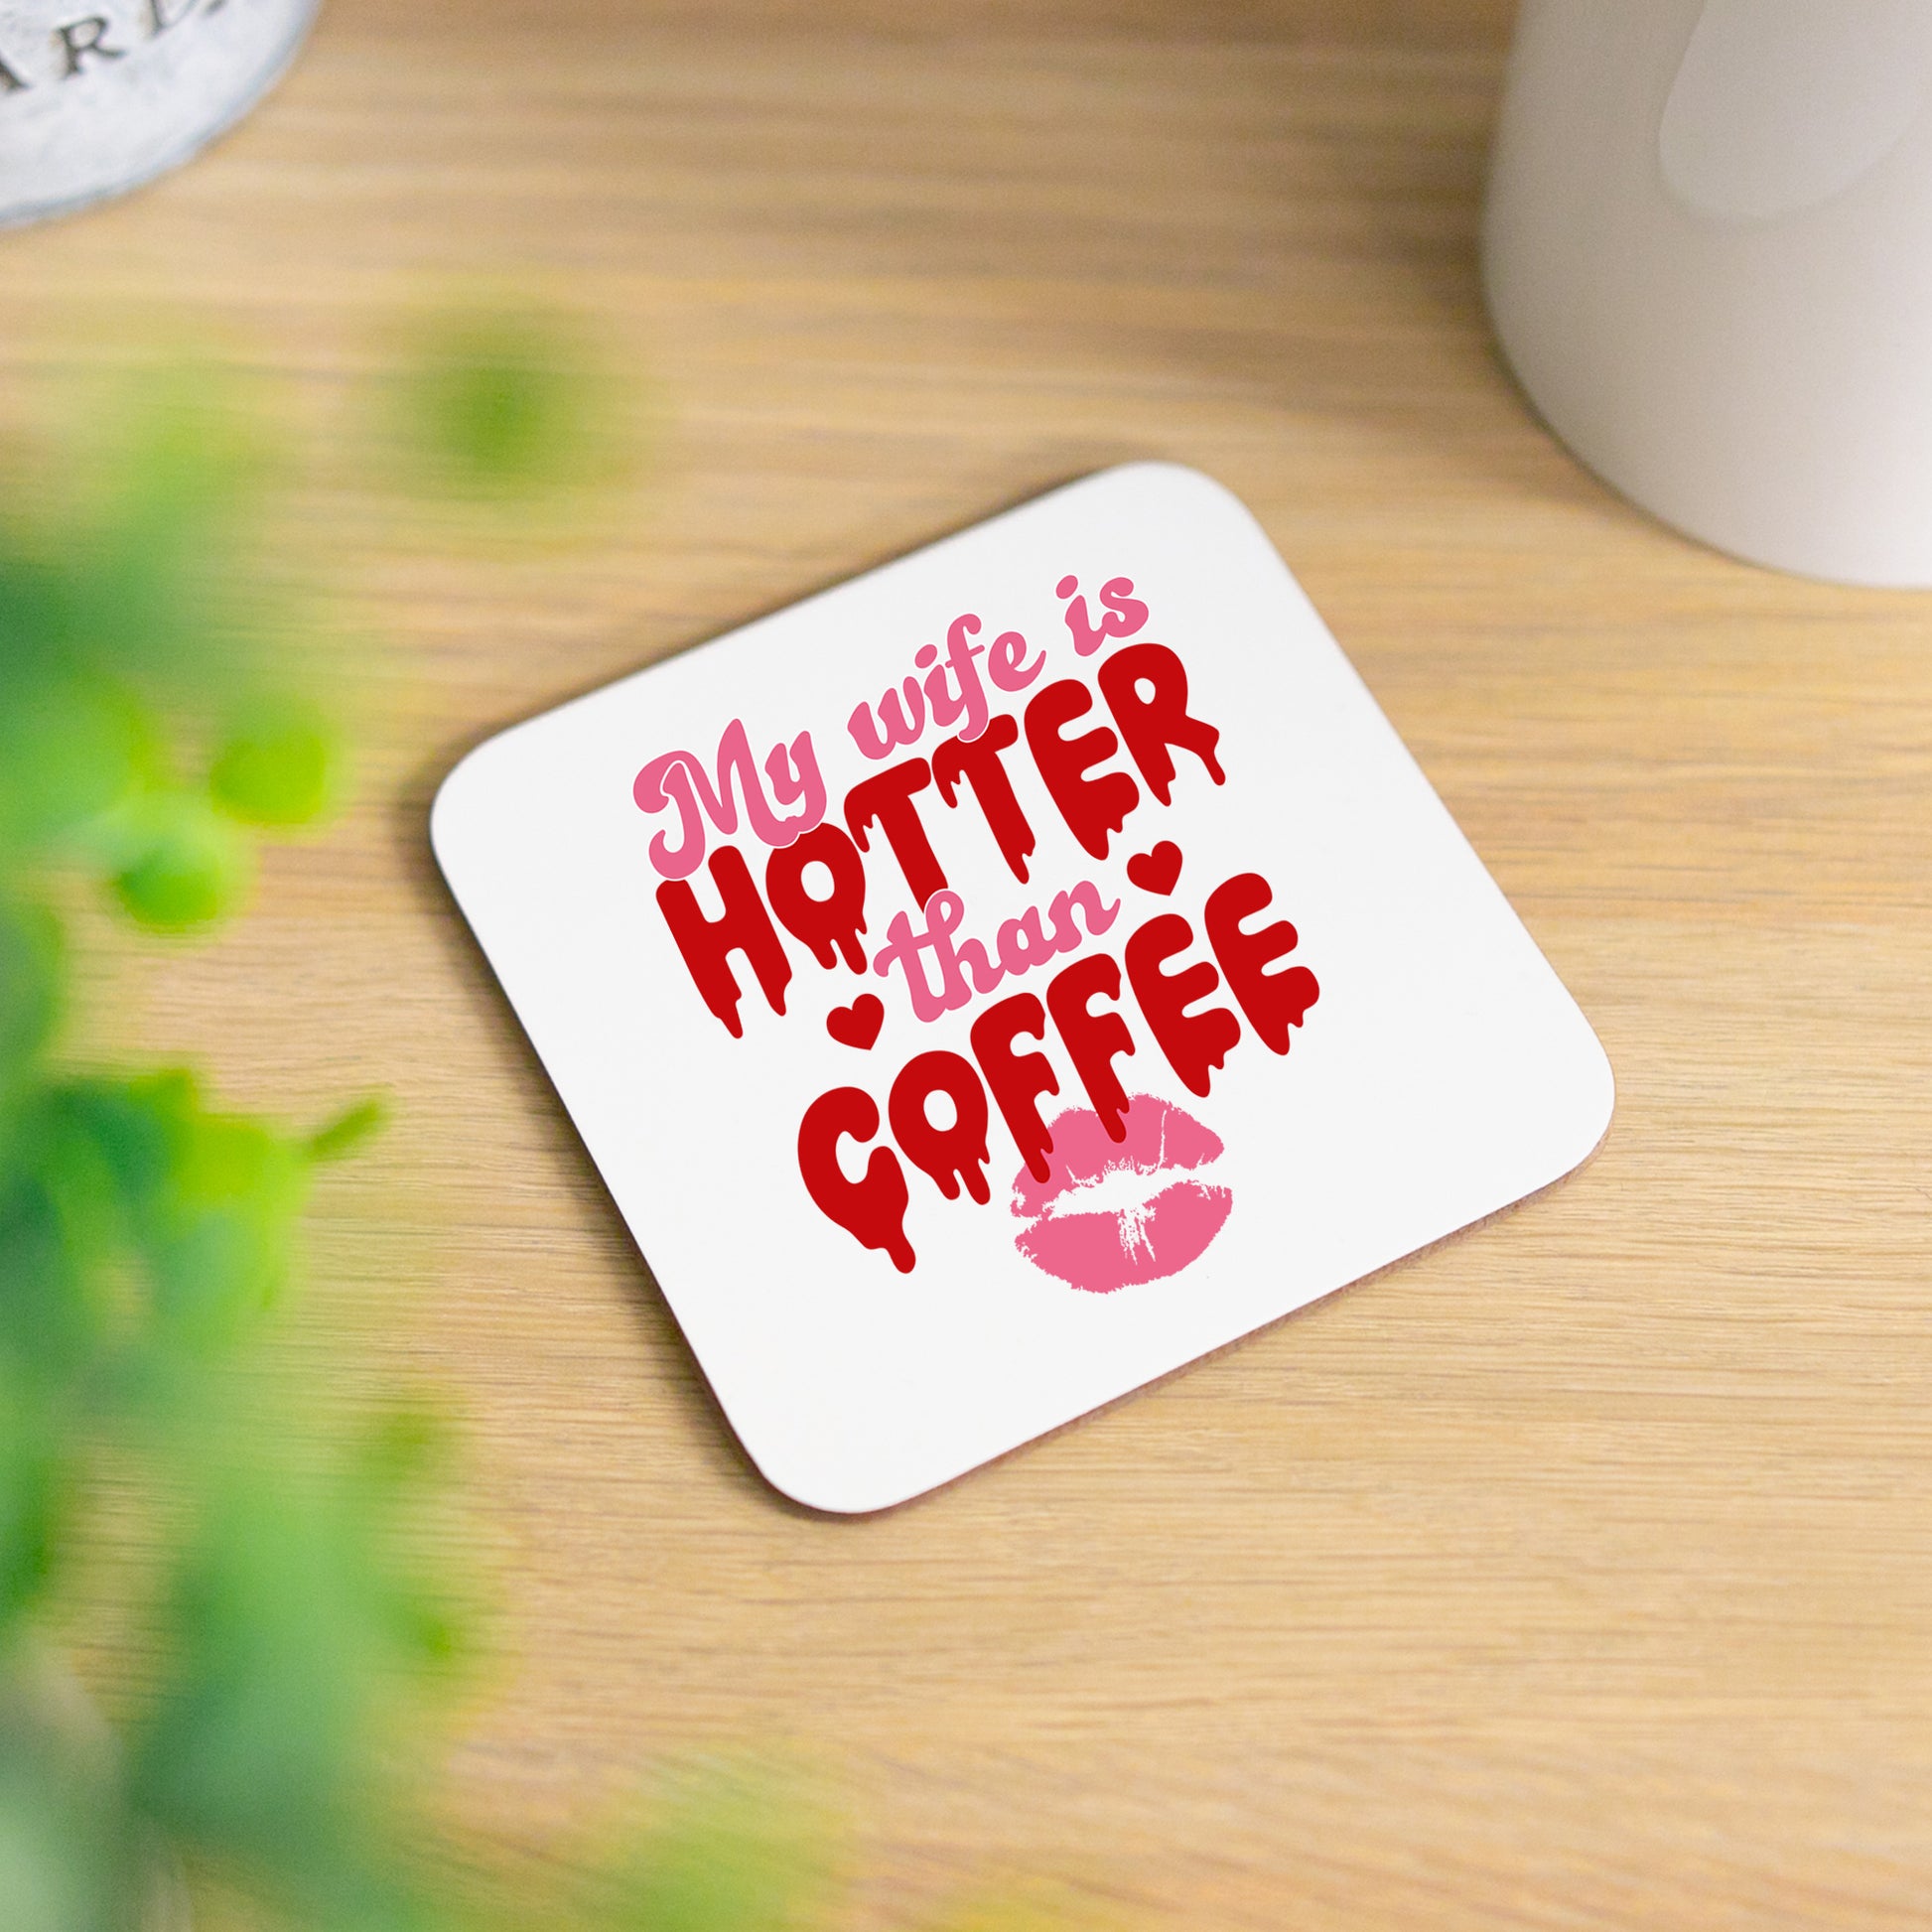 My Wife Is Hotter Than Coffee Mug and/or Coaster Gift  - Always Looking Good - Printed Coaster On Its Own  